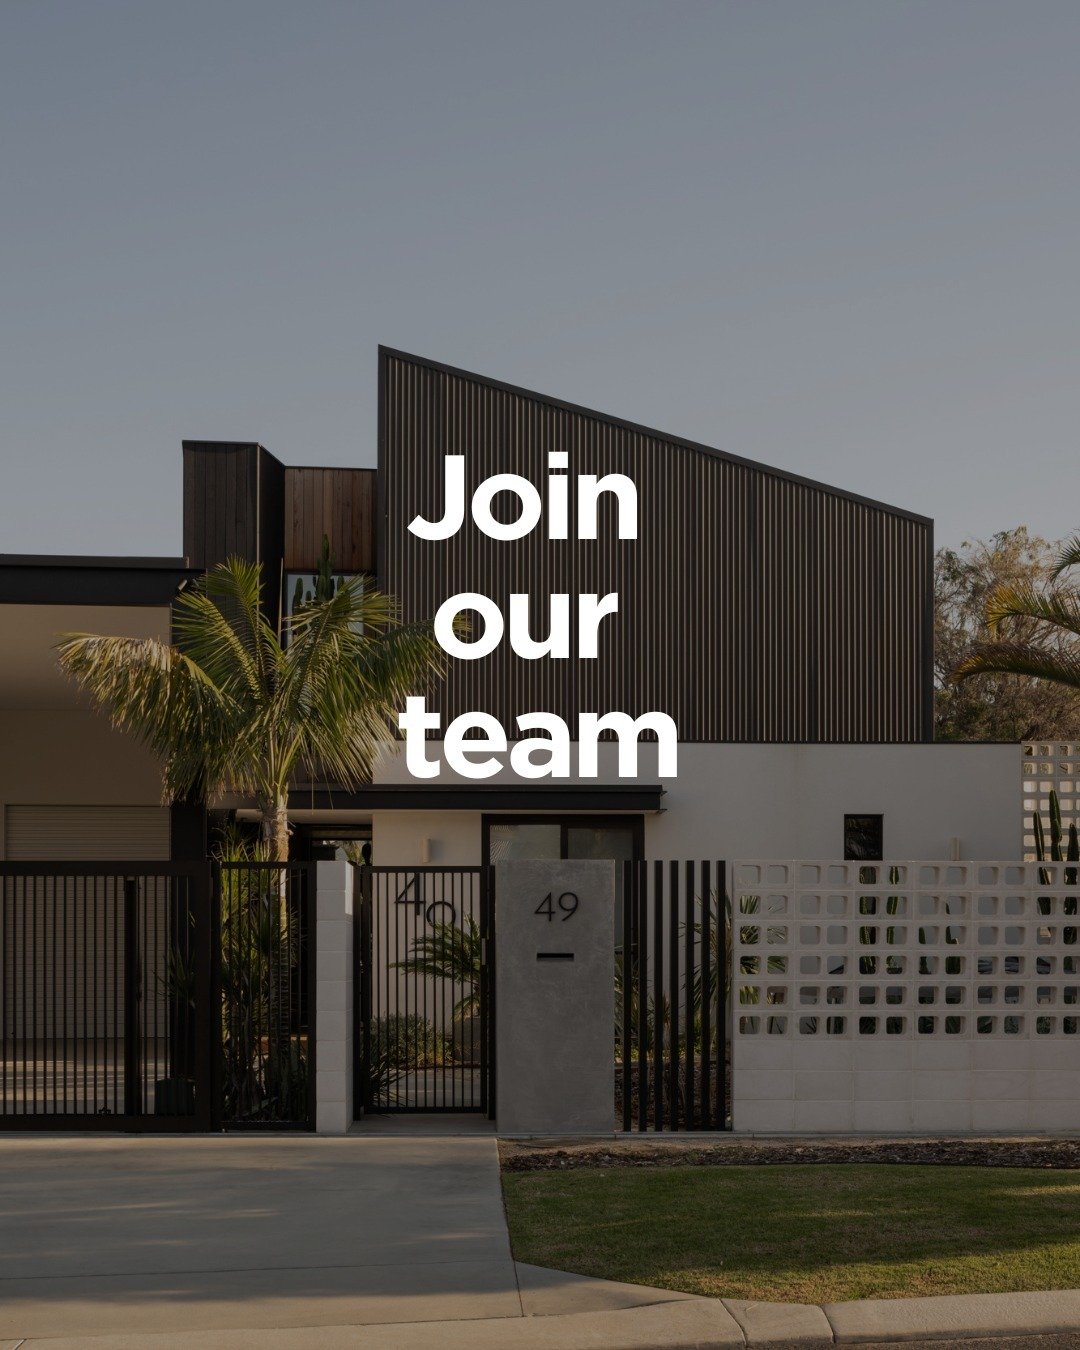 Join our team.⁠
⁠
Our studio grew late last year with the addition of a Senior Architect - Nick, and now we are ready to add another person to our team.⁠
⁠
We are looking for a Graduate of Architecture/Architectural Draftsperson to join our collabora